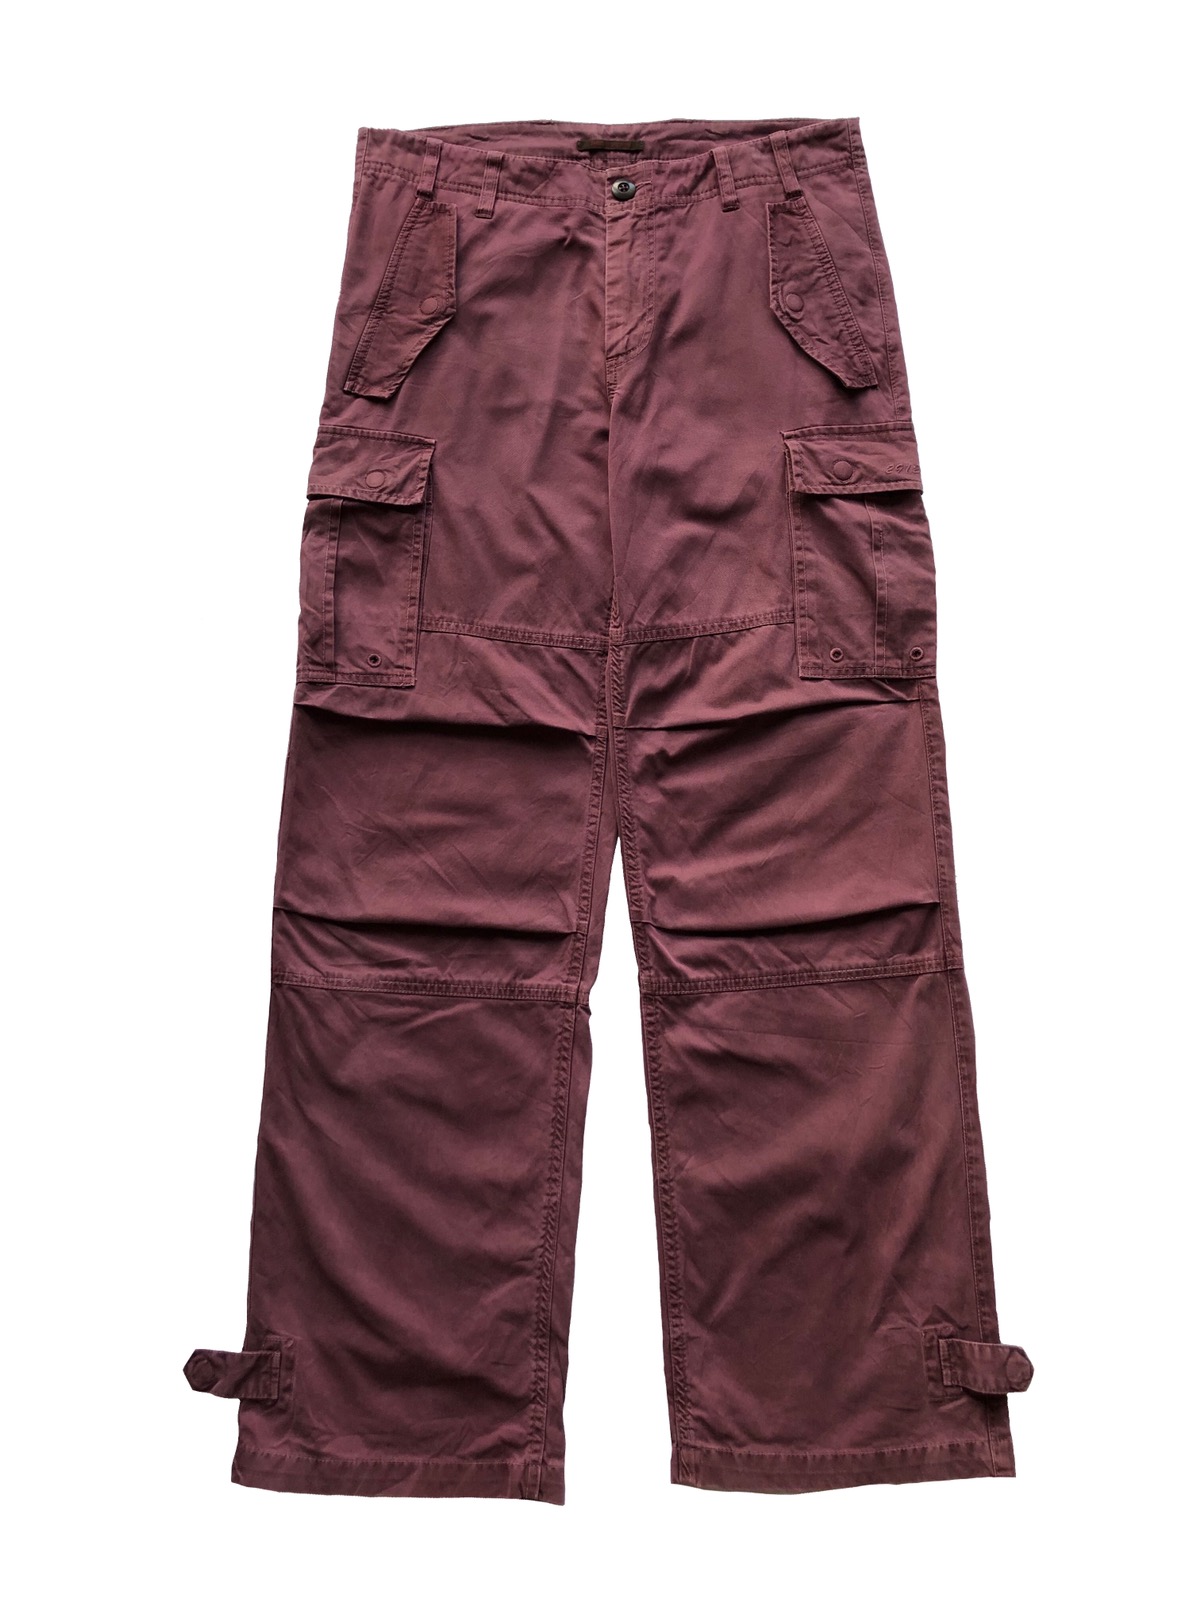 Japanese Brand - 1990s 291295 Homme Military Cargo Trousers - 1